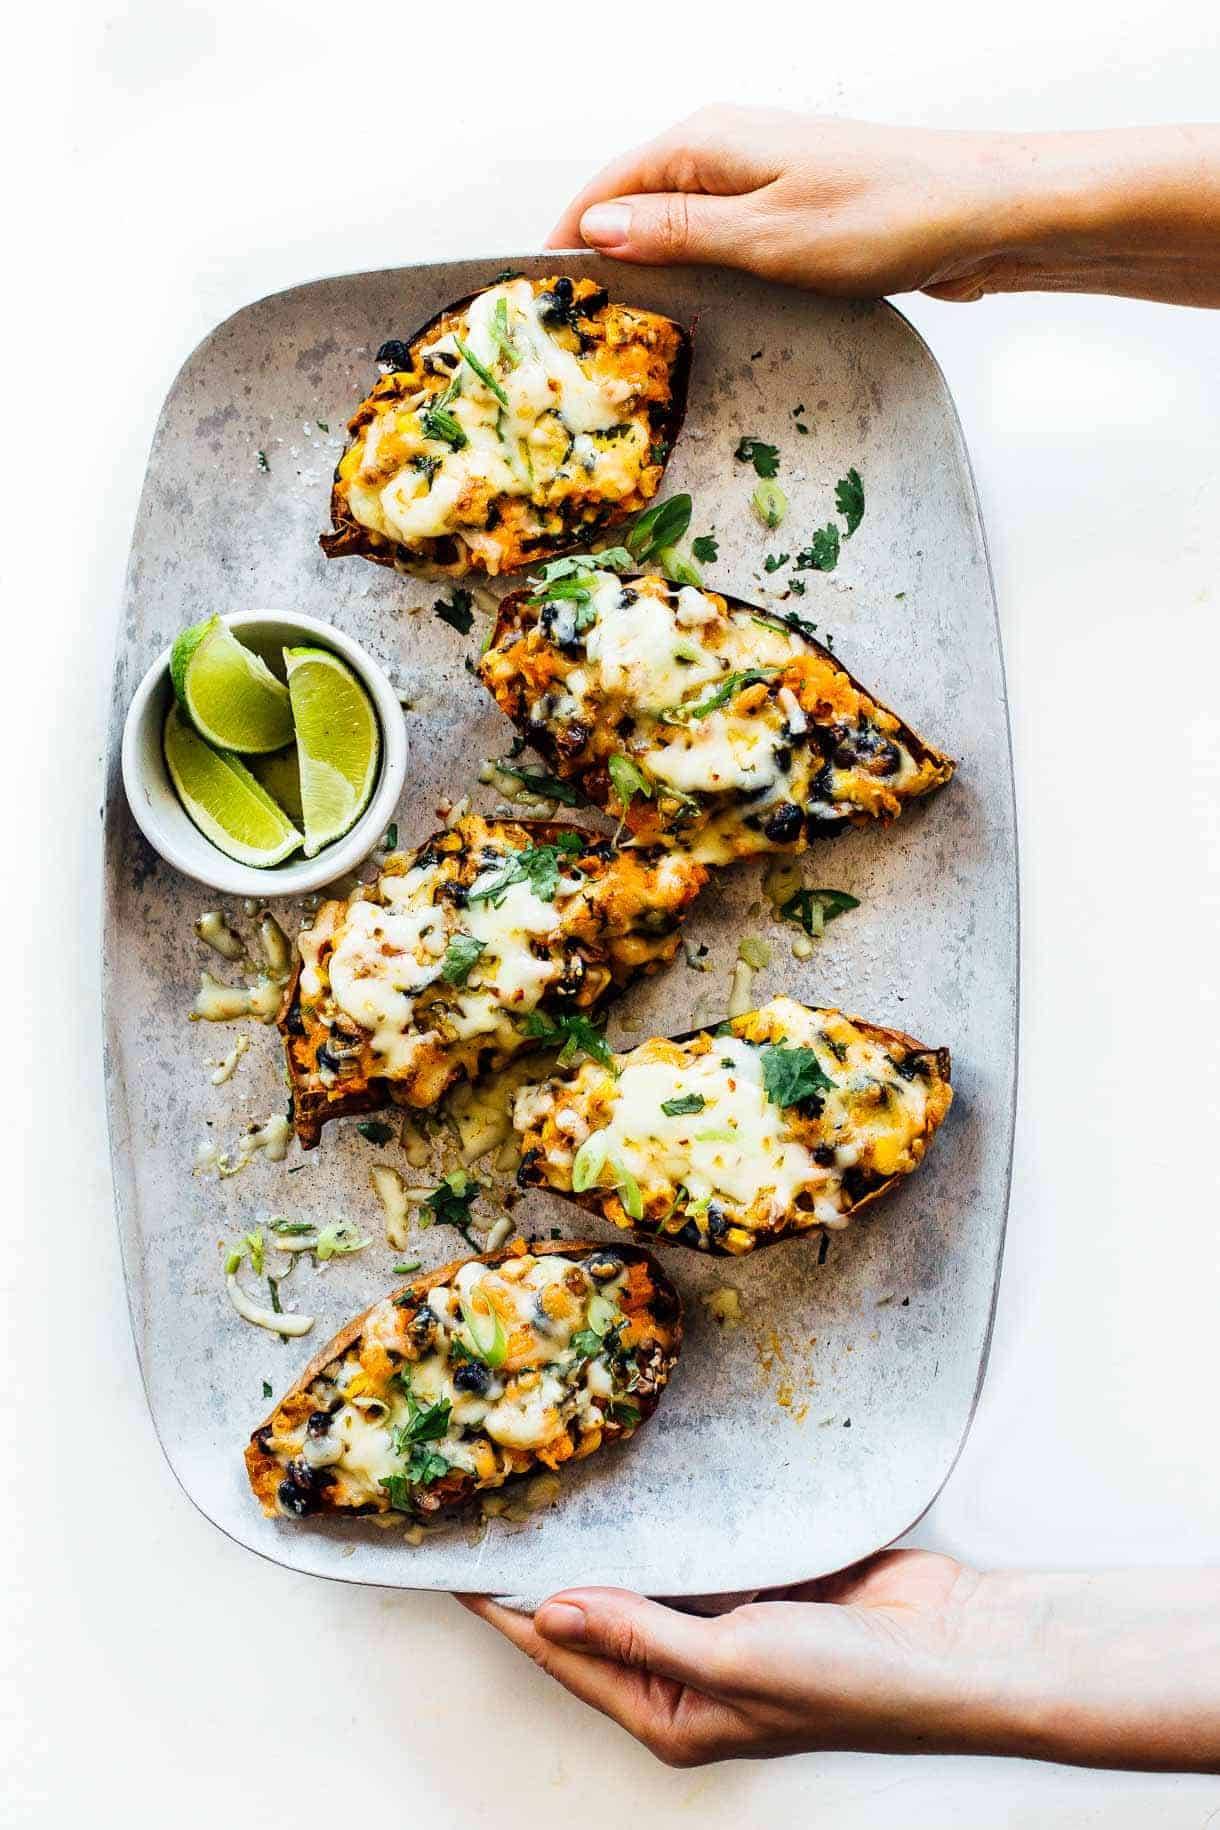 Chipotle sweet potato skins on a plate with limes.